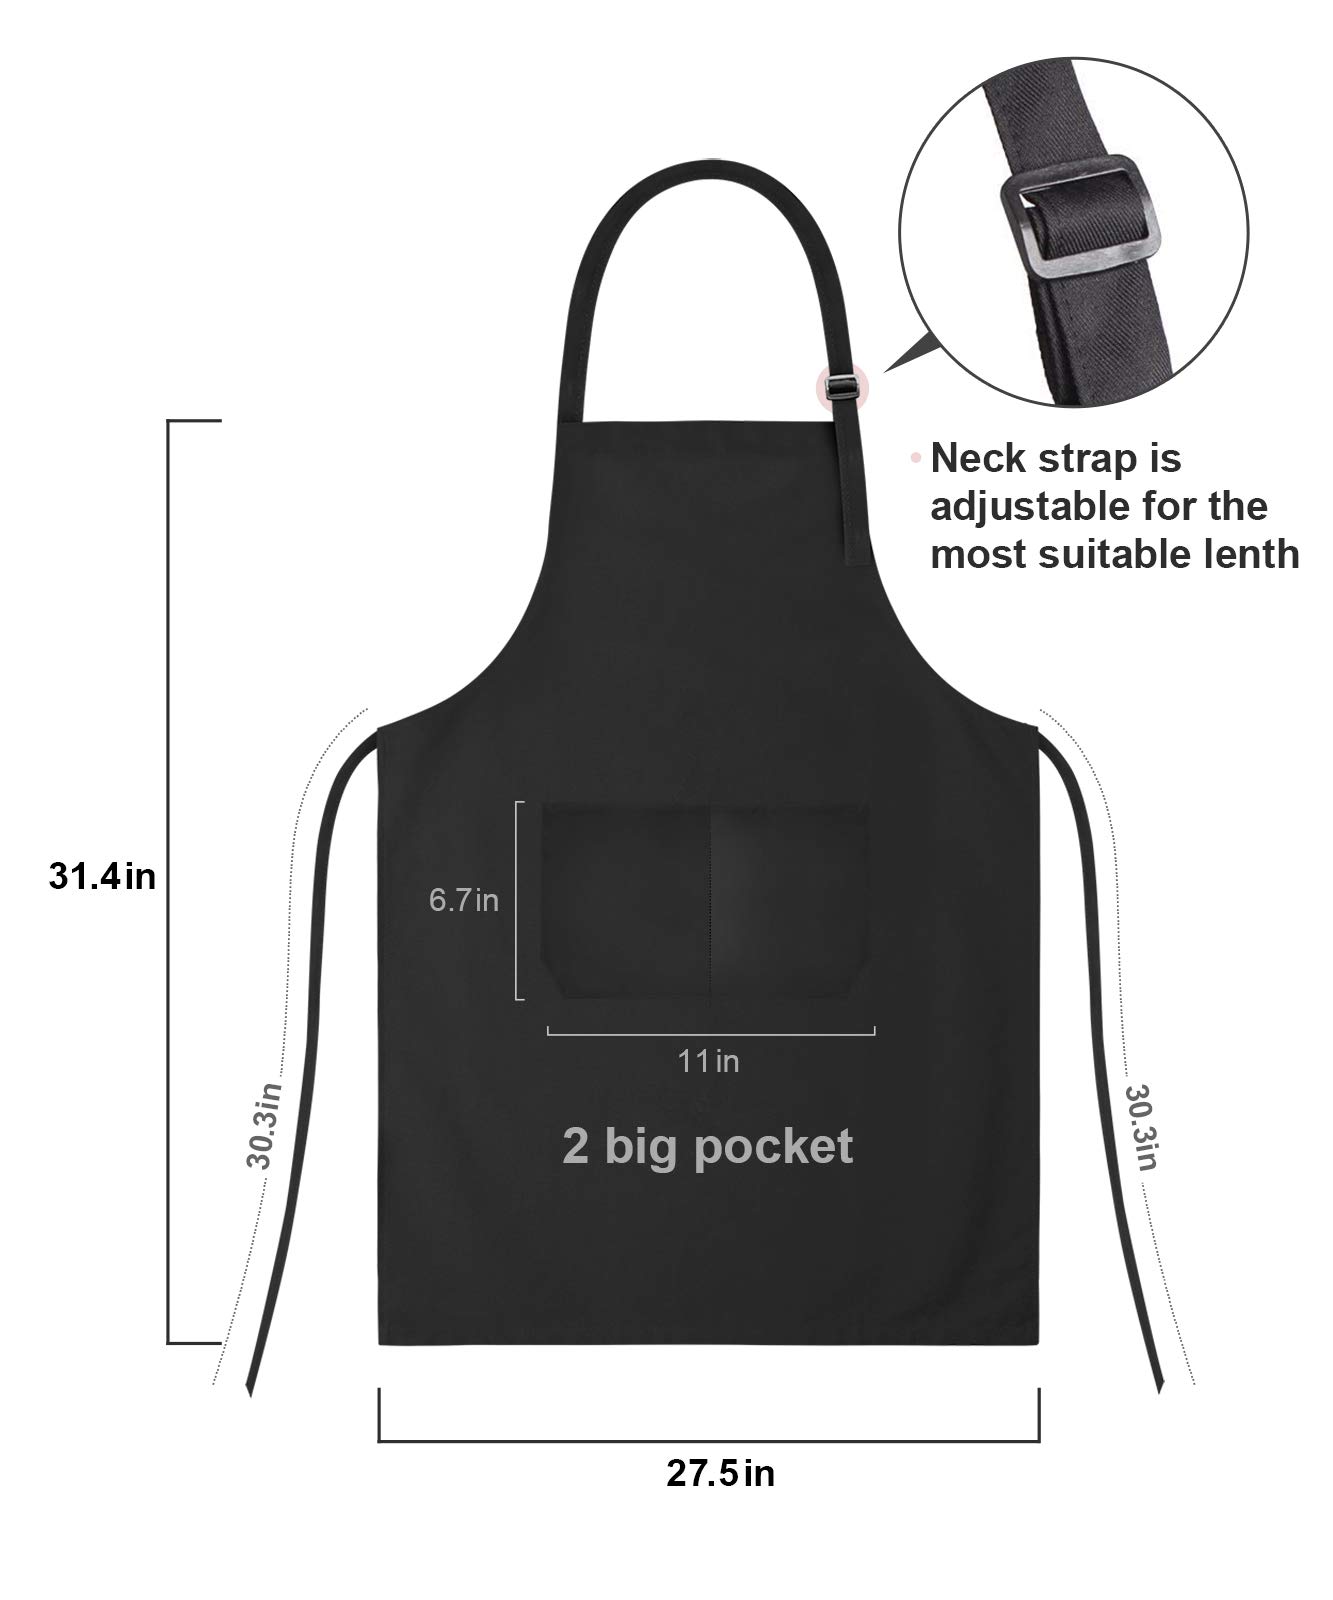 Moanlor Art Funny Cooking Aprons for Women,The Real Boss Apron with Pockets,Gifts for Friends Sister,Cute Birthday Mother's Day Christmas Kitchen Gifts for Mom Wife Grandma-Black